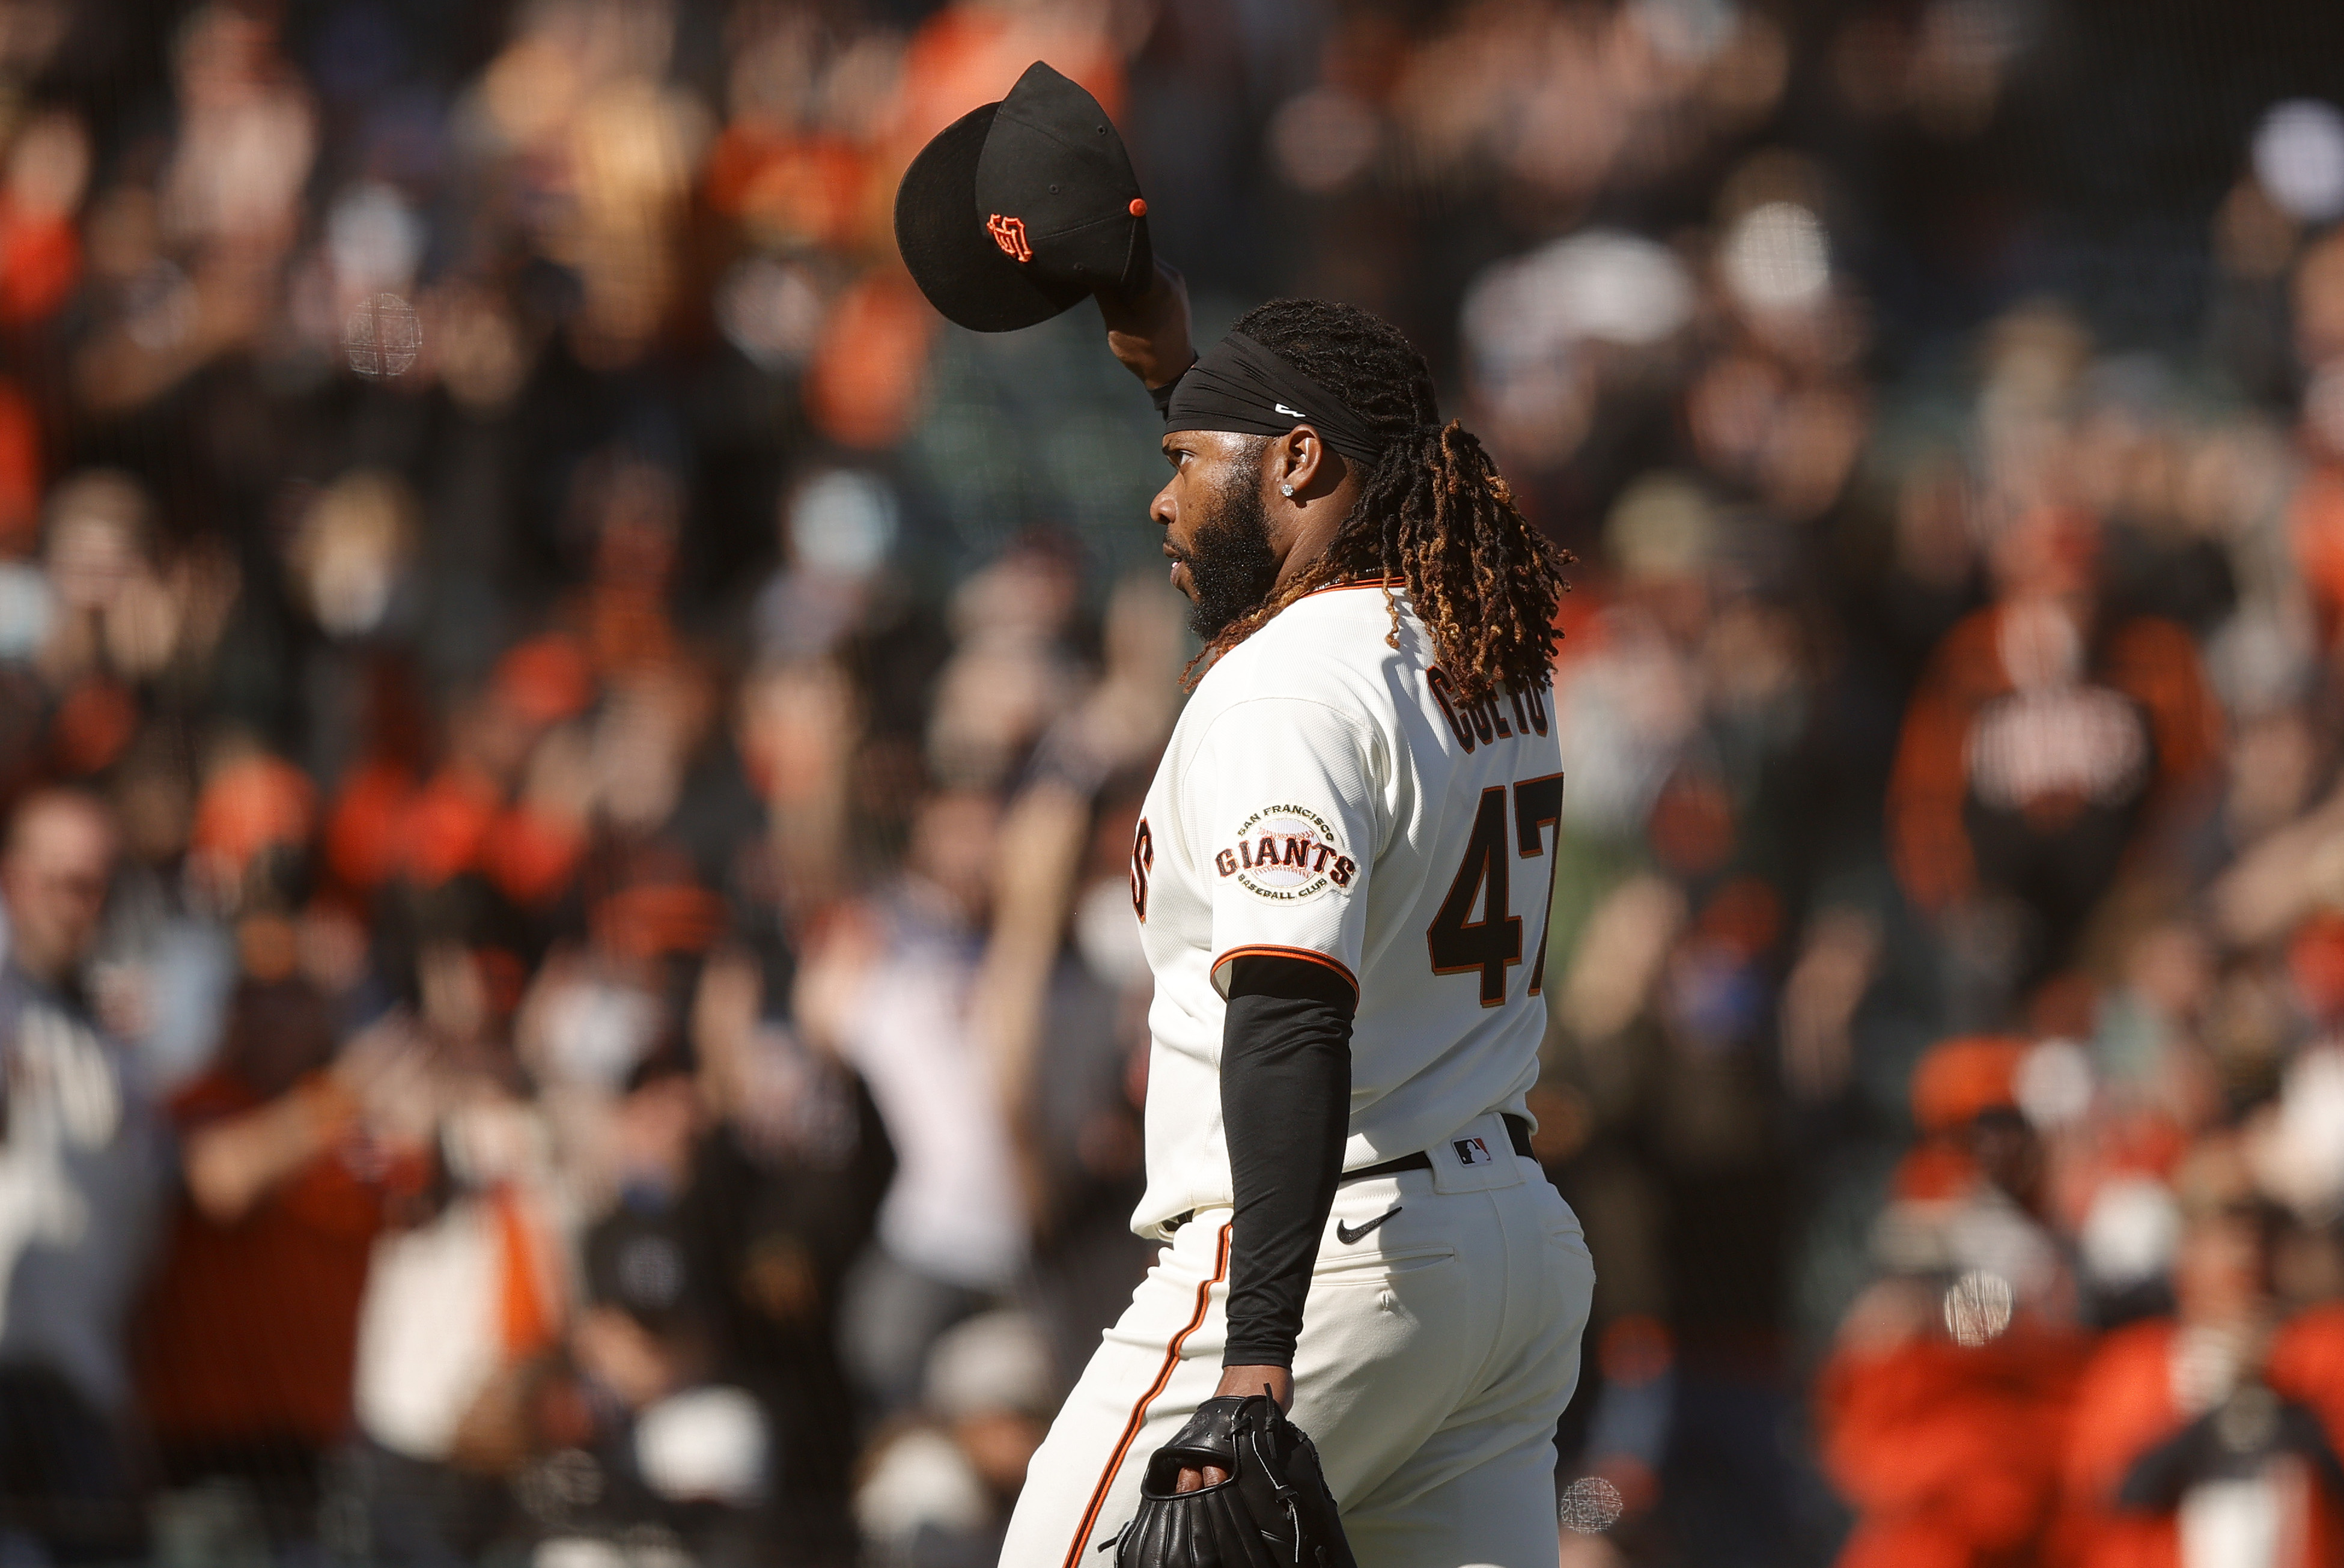 Reds have shown interest in Johnny Cueto reunion